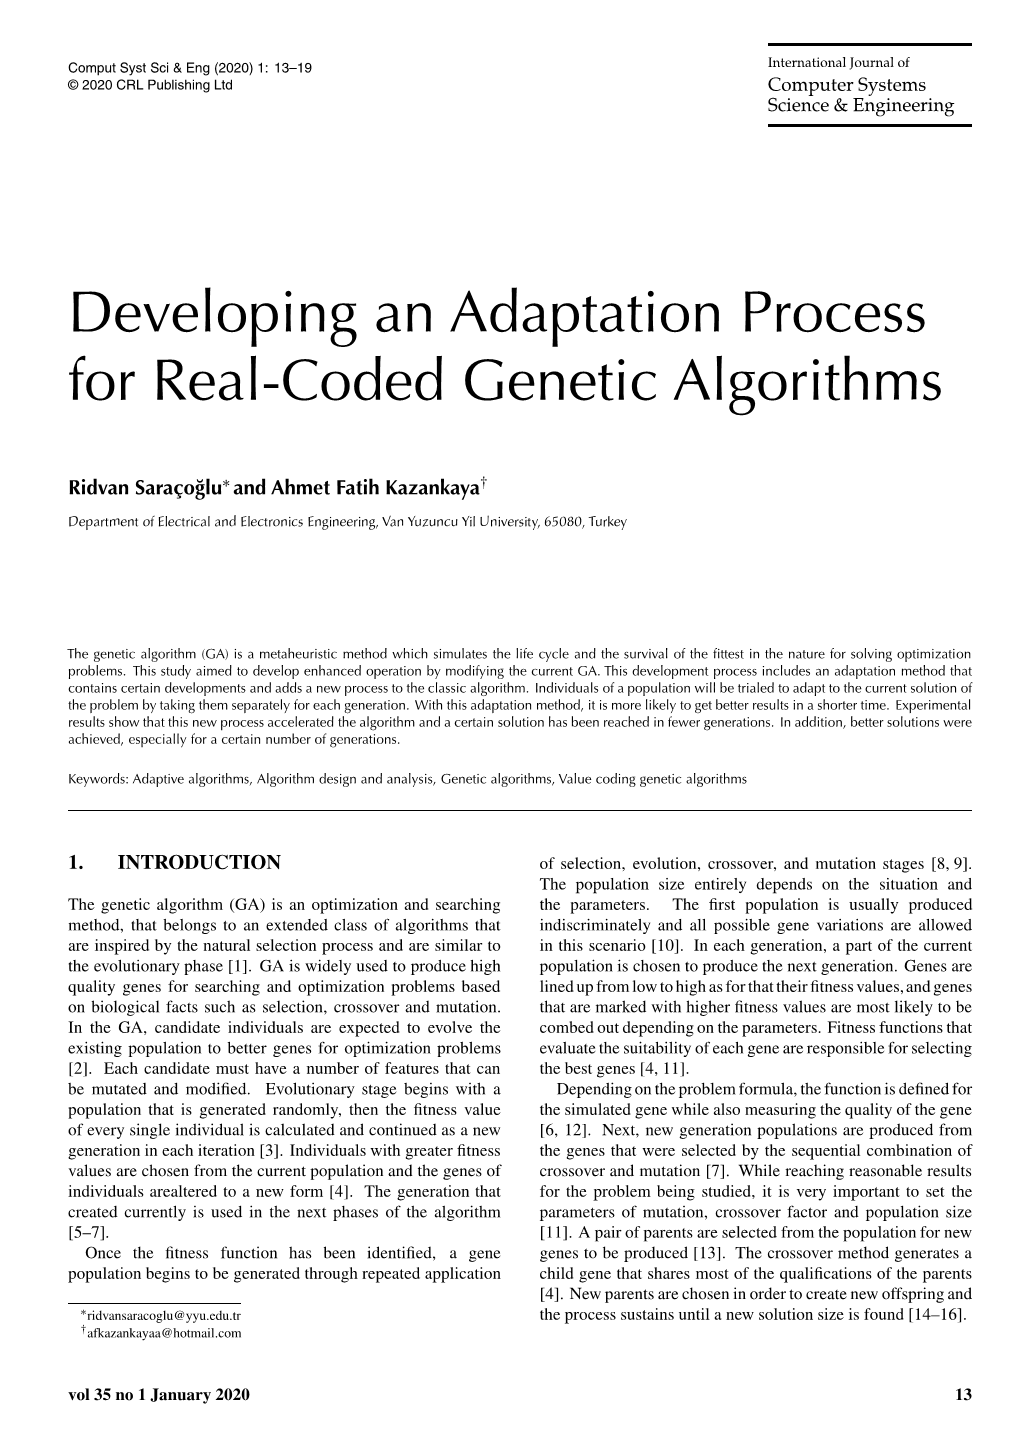 Developing an Adaptation Process for Real-Coded Genetic Algorithms